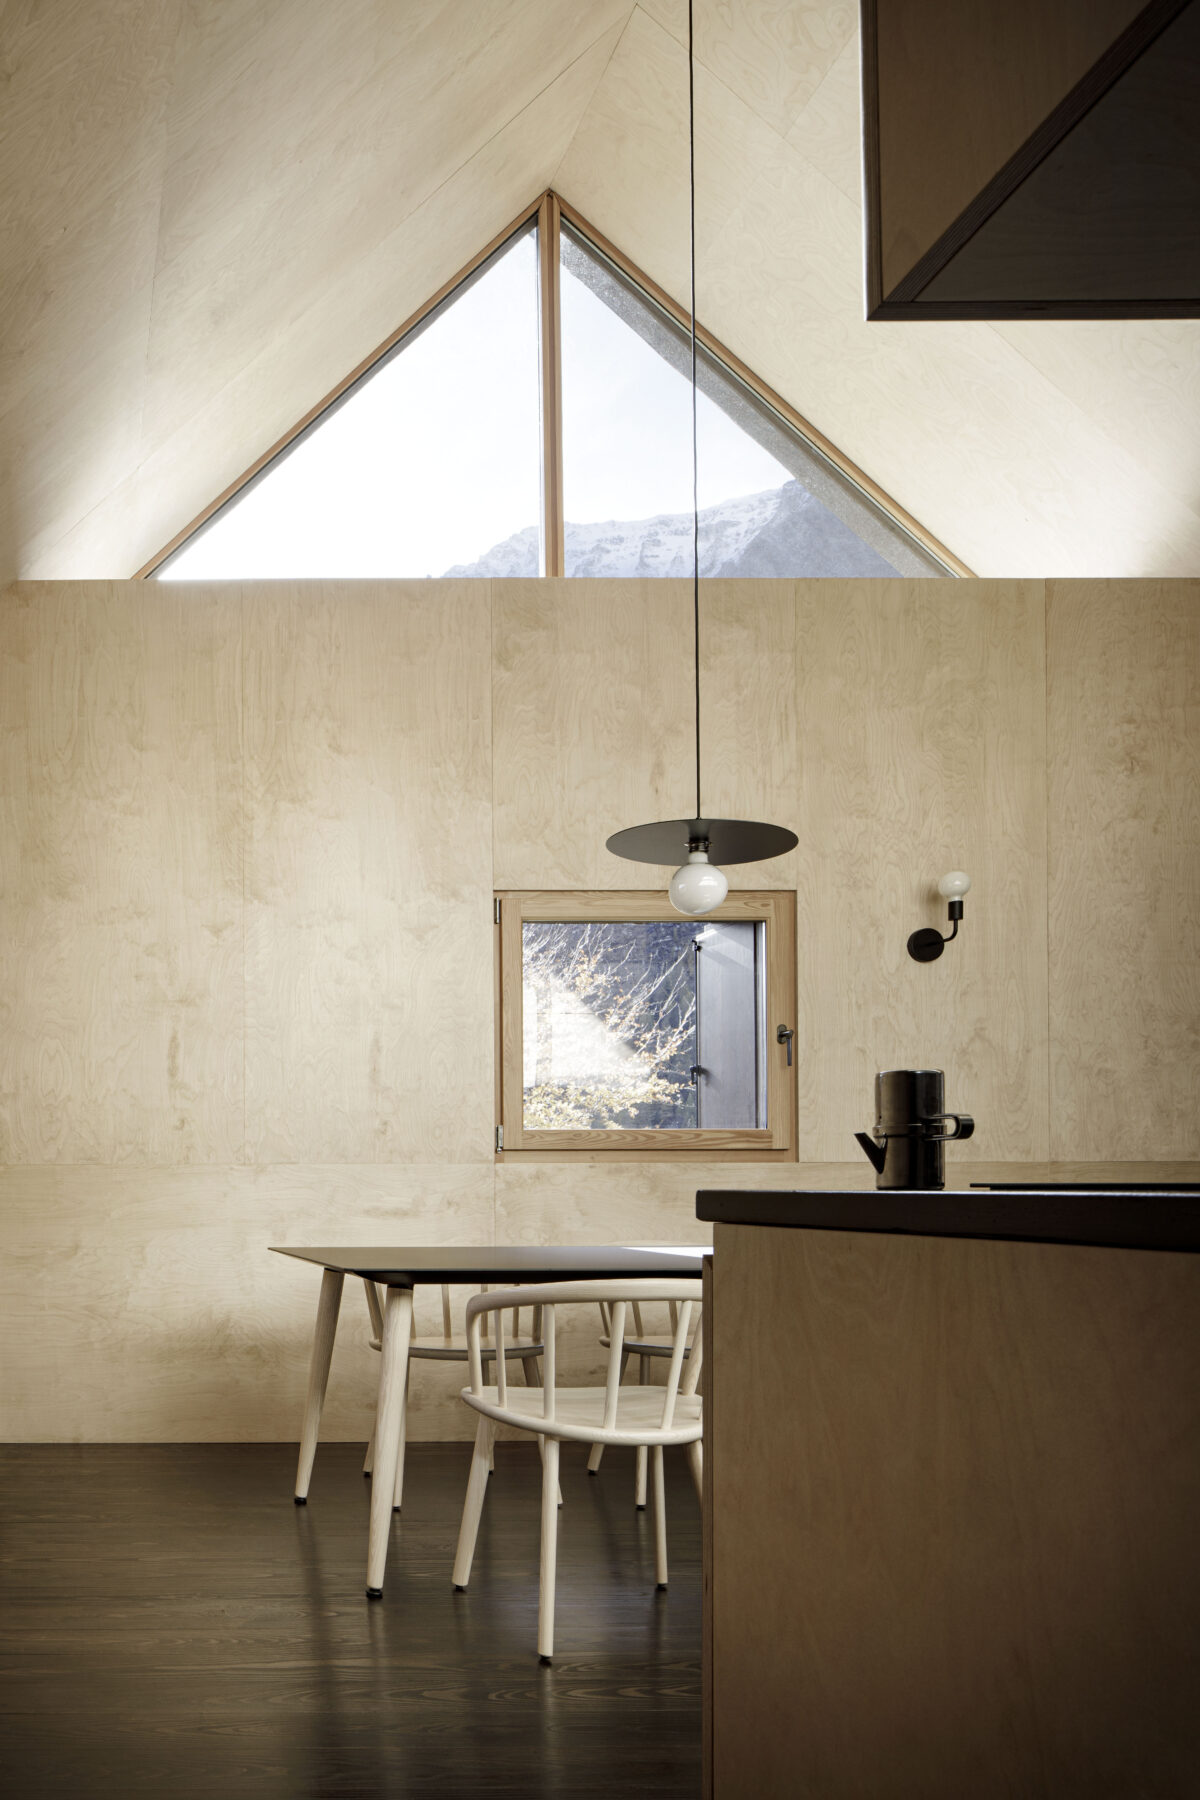 Archisearch House Cinsc: a retreat among the peaks of the Italian Alps by ATOMAA